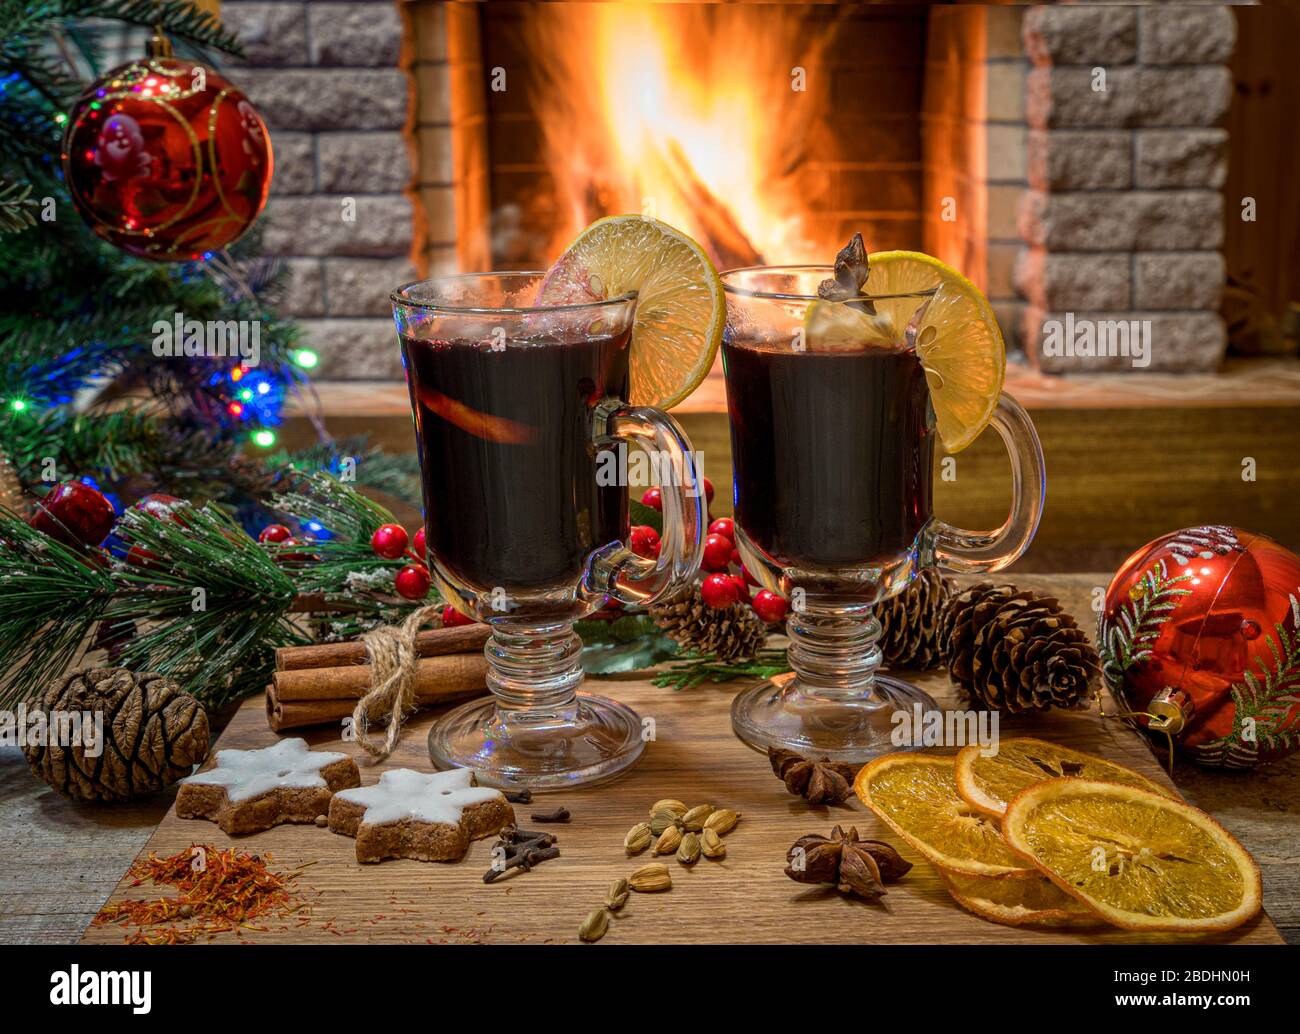 https://c8.alamy.com/comp/2BDHN0H/cozy-christmas-scene-with-two-glasses-of-mulled-wine-on-a-wooden-board-before-christmas-tree-decorated-toys-and-christmas-lights-opposite-burning-fire-2BDHN0H.jpg